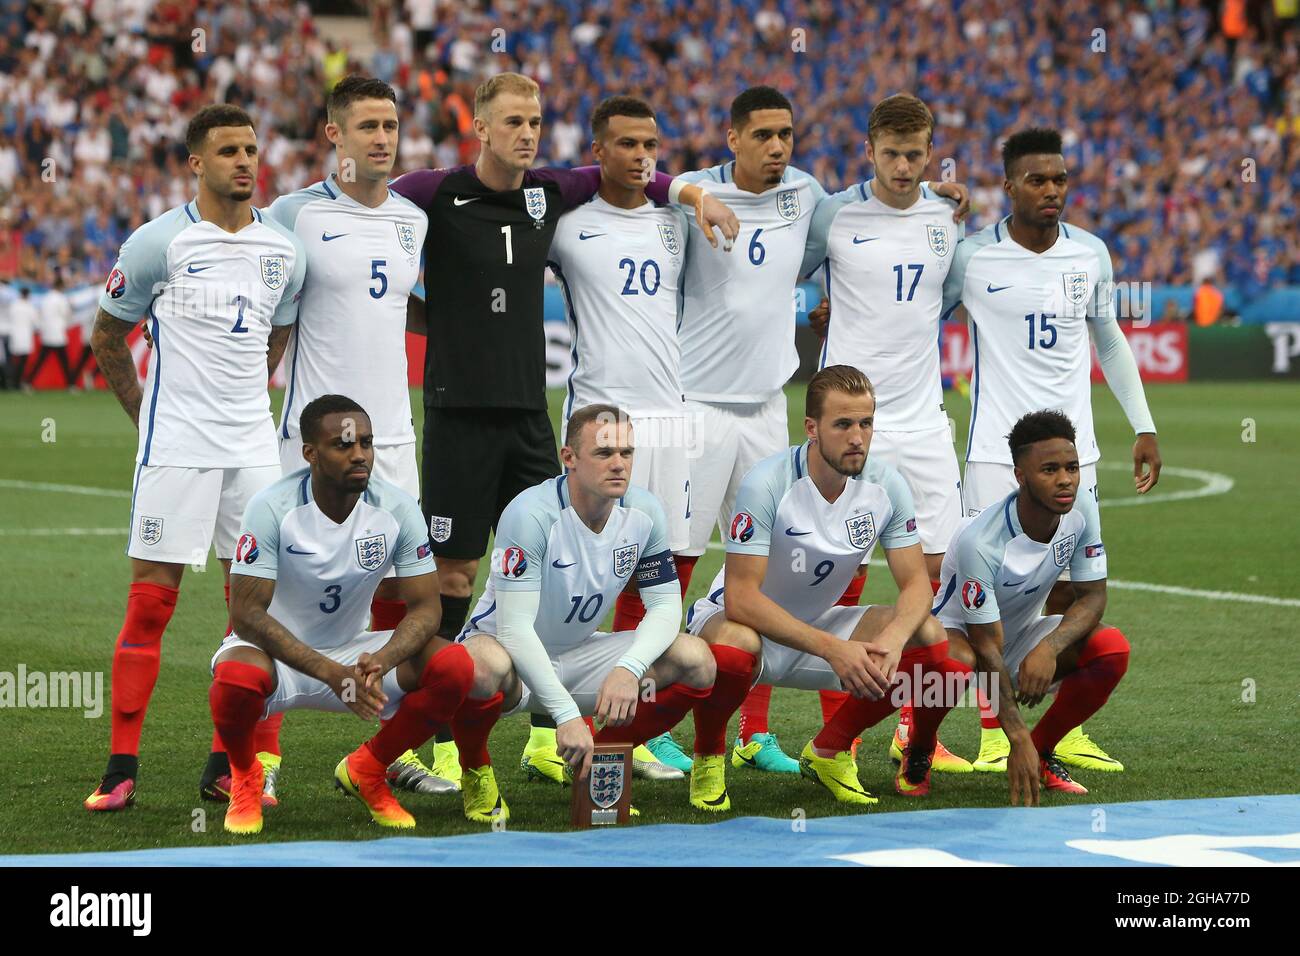 England team group during the UEFA European Championship 2016 match at the  Allianz Riviera, Nice. Picture date June 27th, 2016 Pic Phil  Oldham/Sportimage via PA Images Stock Photo - Alamy